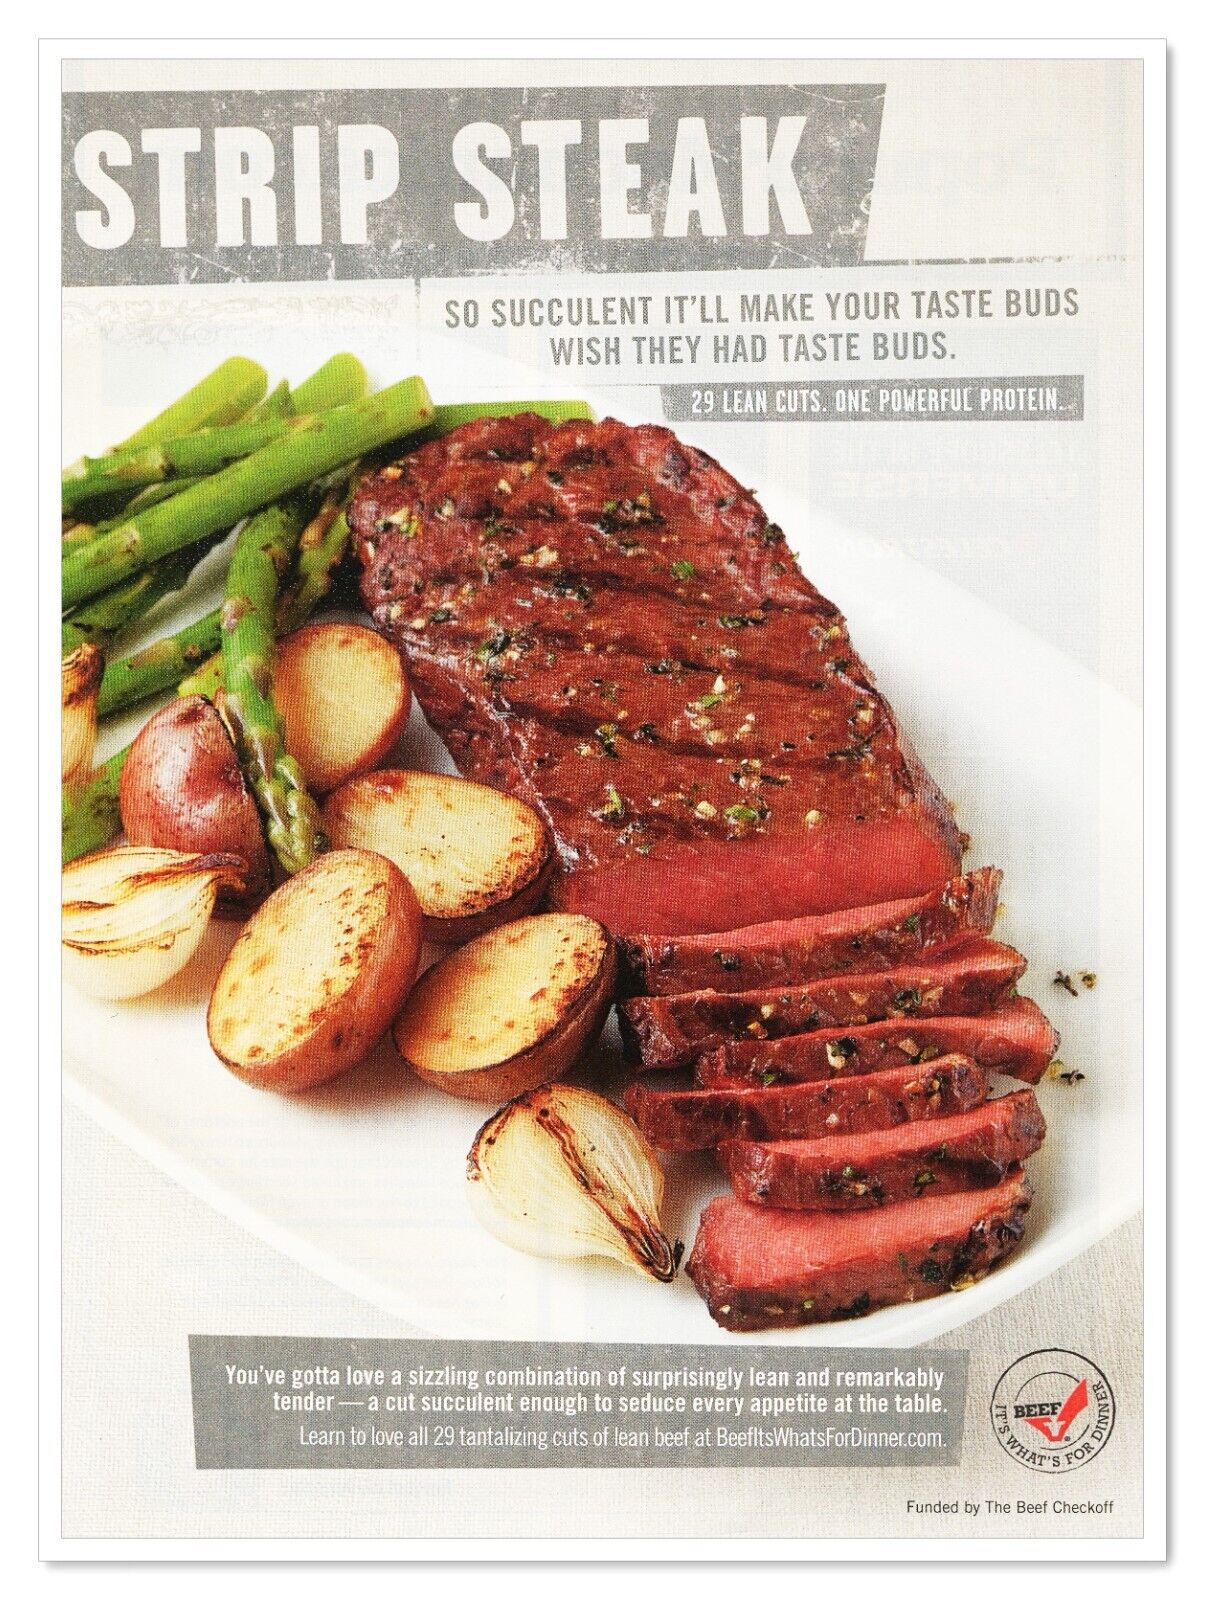 Beef It's What's for Dinner Strip Steak 2011 Full-Page Print Magazine Food Ad